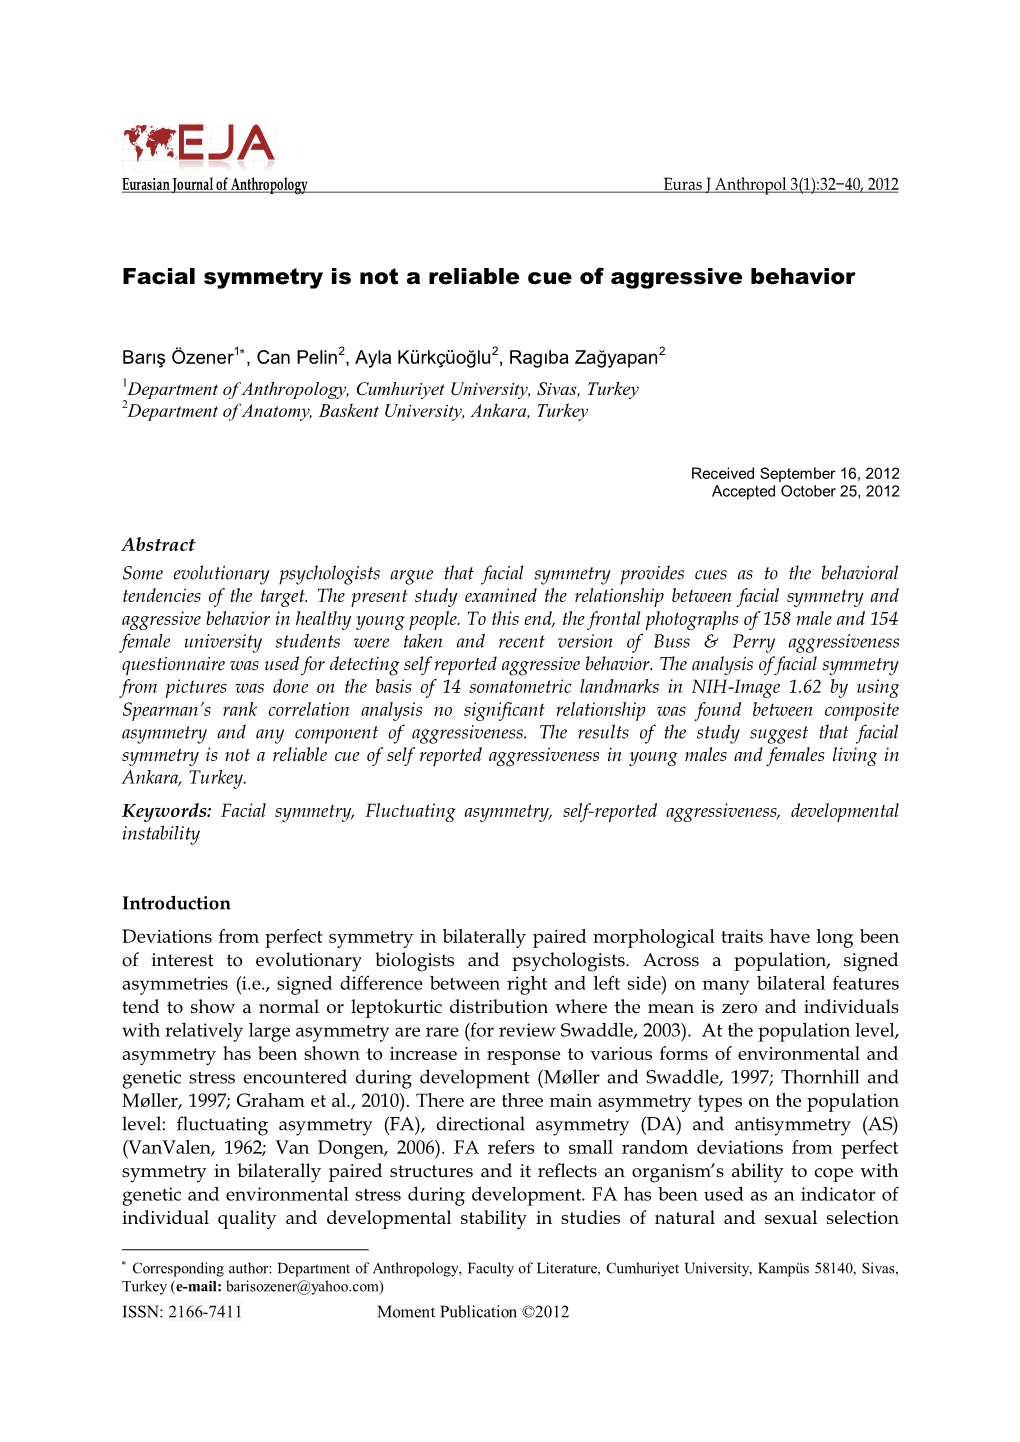 Facial Symmetry Is Not a Reliable Cue of Aggressive Behavior